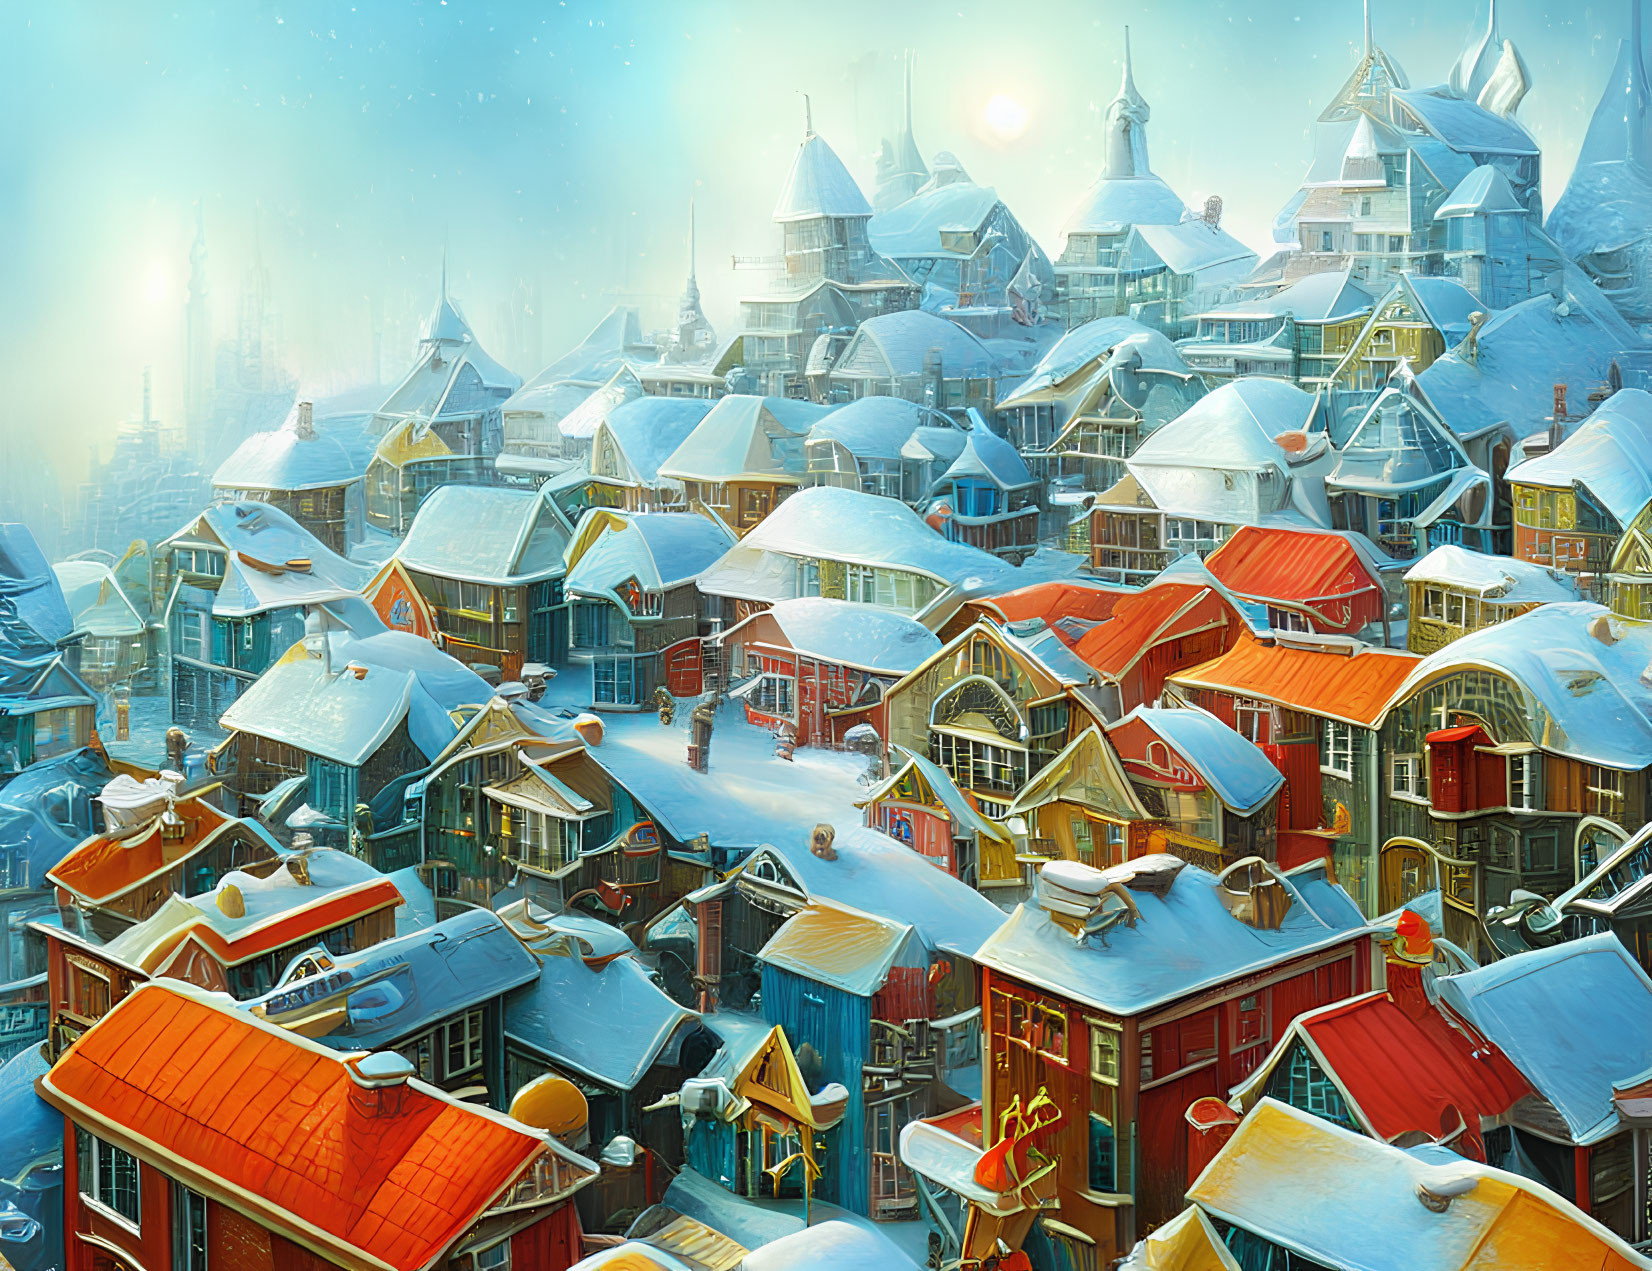 Winter village scene with colorful roofs and snowy landscape